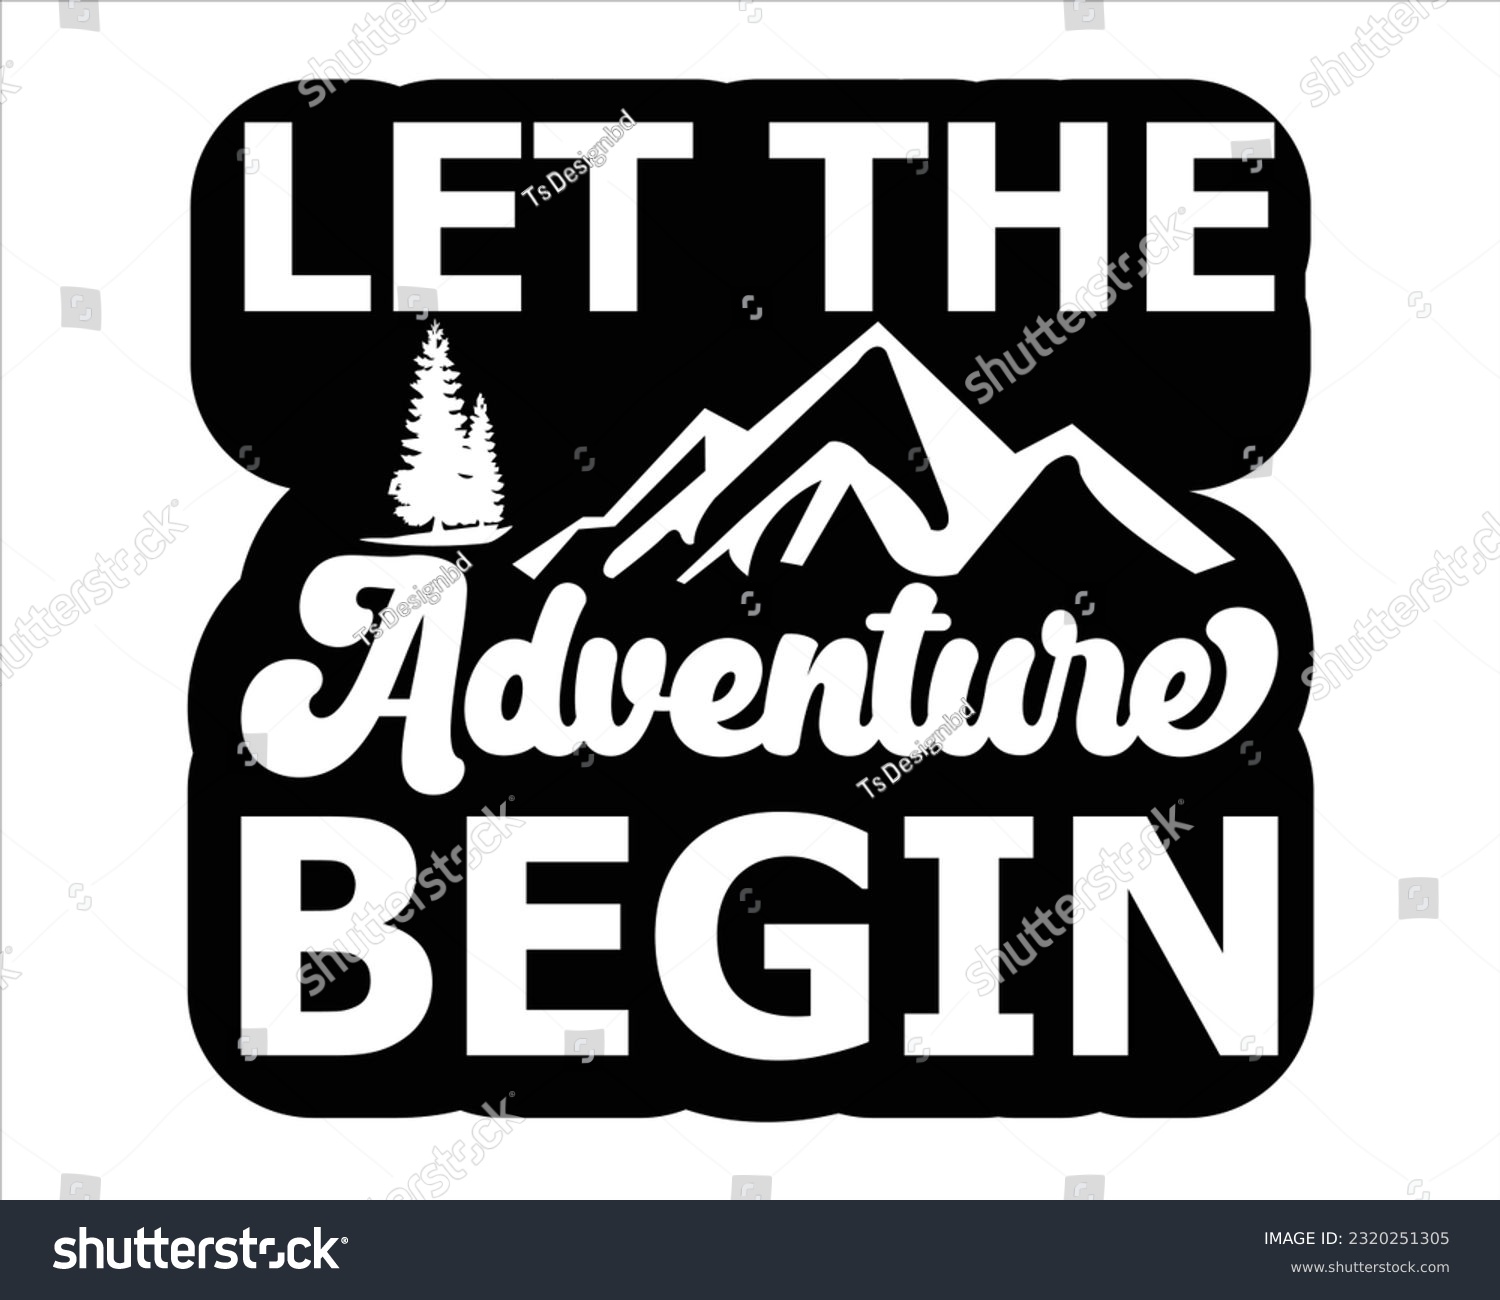 SVG of Hiking Svg Design, Mountain illustration, outdoor adventure ,Outdoor Adventure Inspiring Motivation Quote, camping, hiking svg